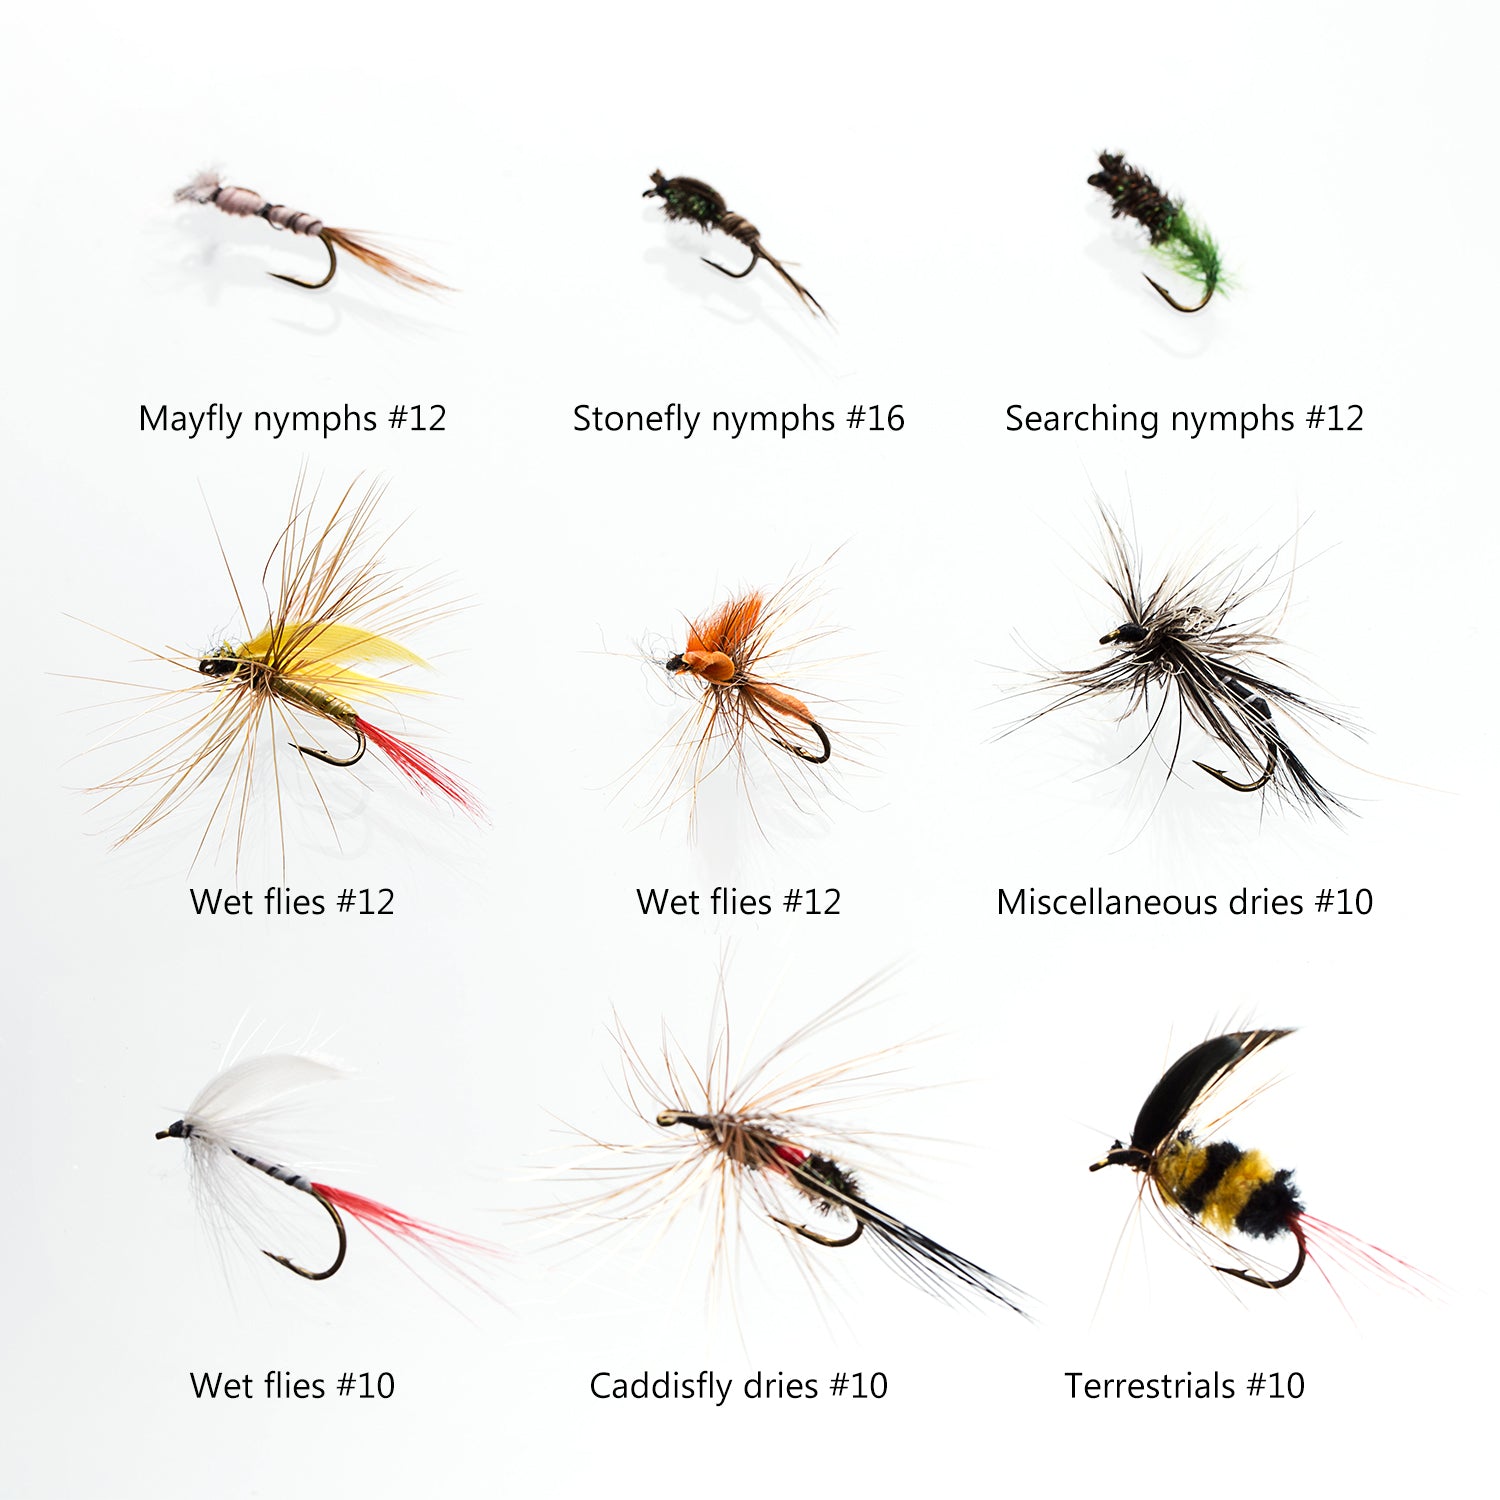 Bassdash Fly Fishing Flies Kit Fly Assortment Trout Bass Fishing with Fly Box, 36/64/72/76/80/96pcs with Dry/Wet Flies, Nymphs, Streamers